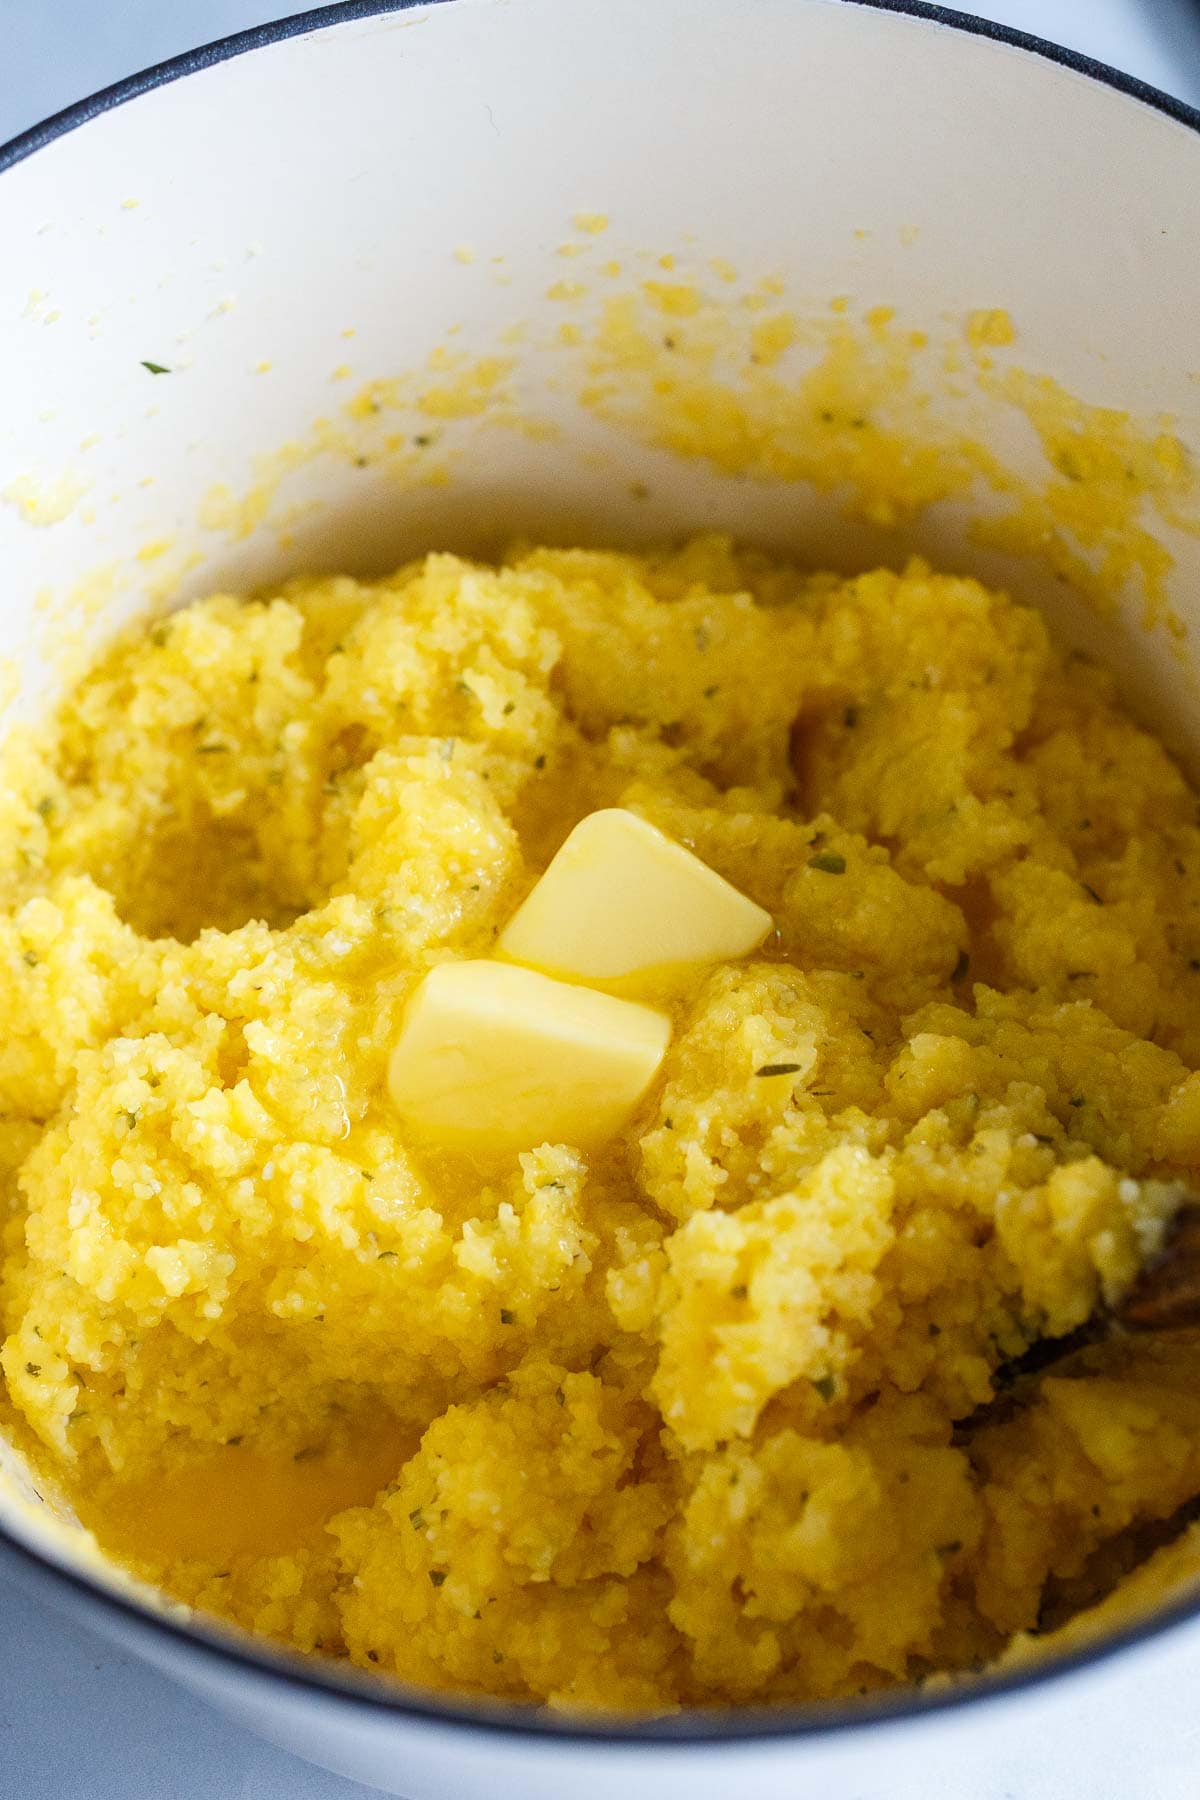 Cooked polenta with butter.